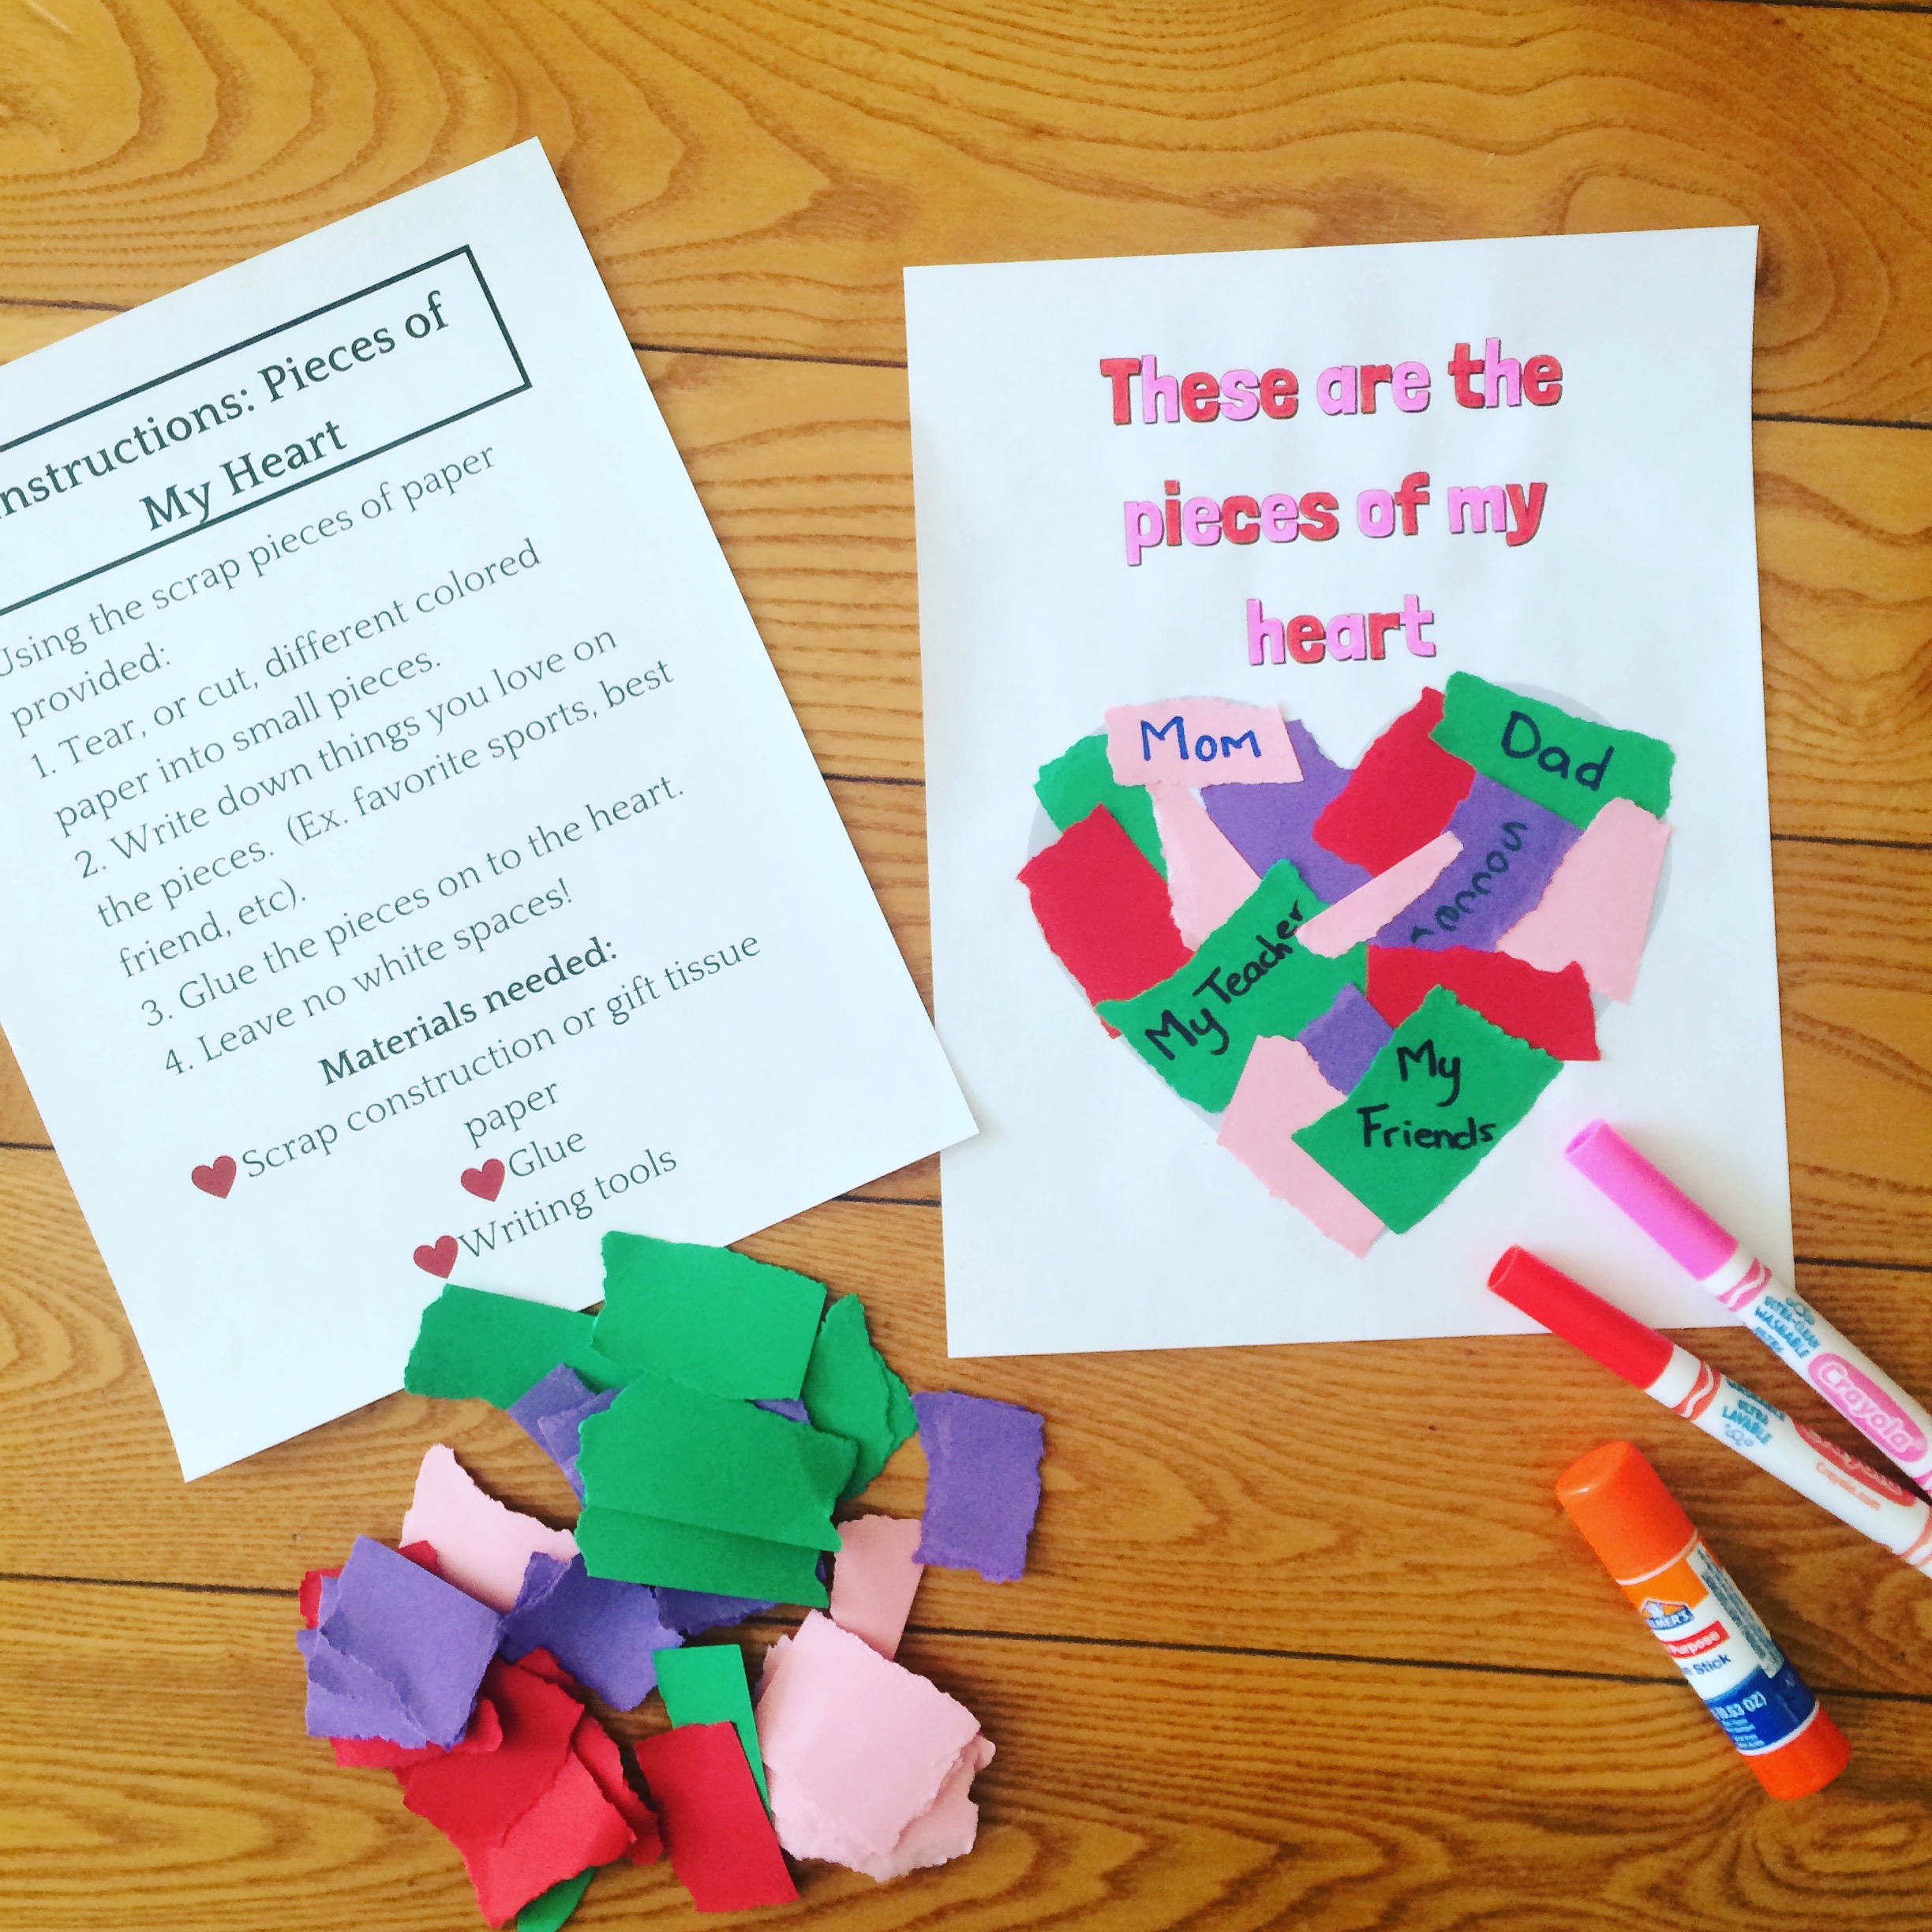 An adorable, lovey-dovey Valentine's Day center activities package! Receive 6 fun center activities ranging in curriculum topics such as: Math, Science, Writing and Art. Each center activity comes with it's own instruction page, for absolute clarity. Your class will love showing their Valentine's Day spirit, while still learning with these creative activities.